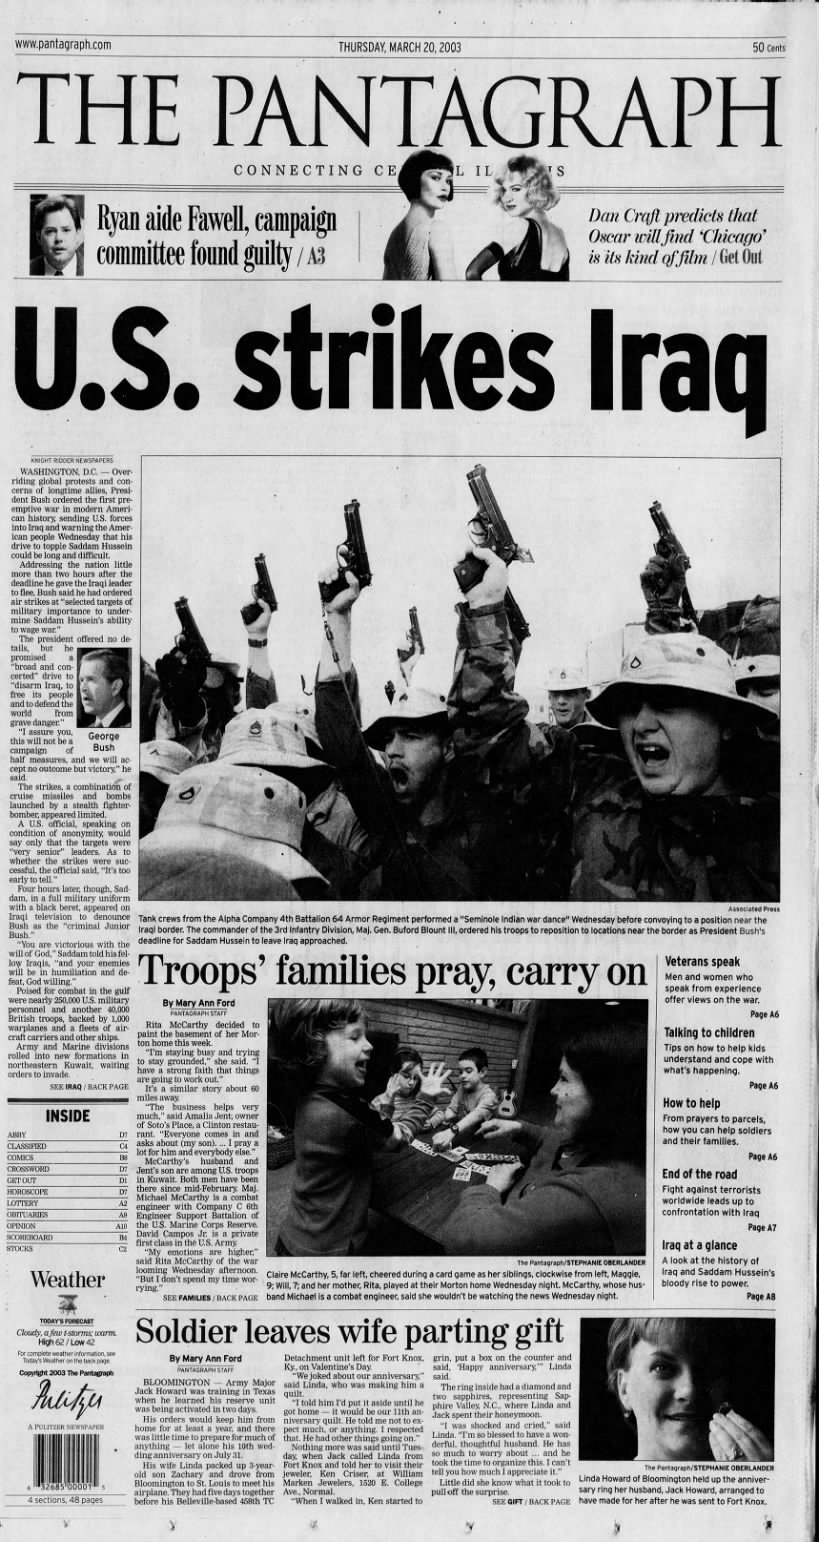 the day war began in iraq march 19, 2003 (night before this morning's paper)